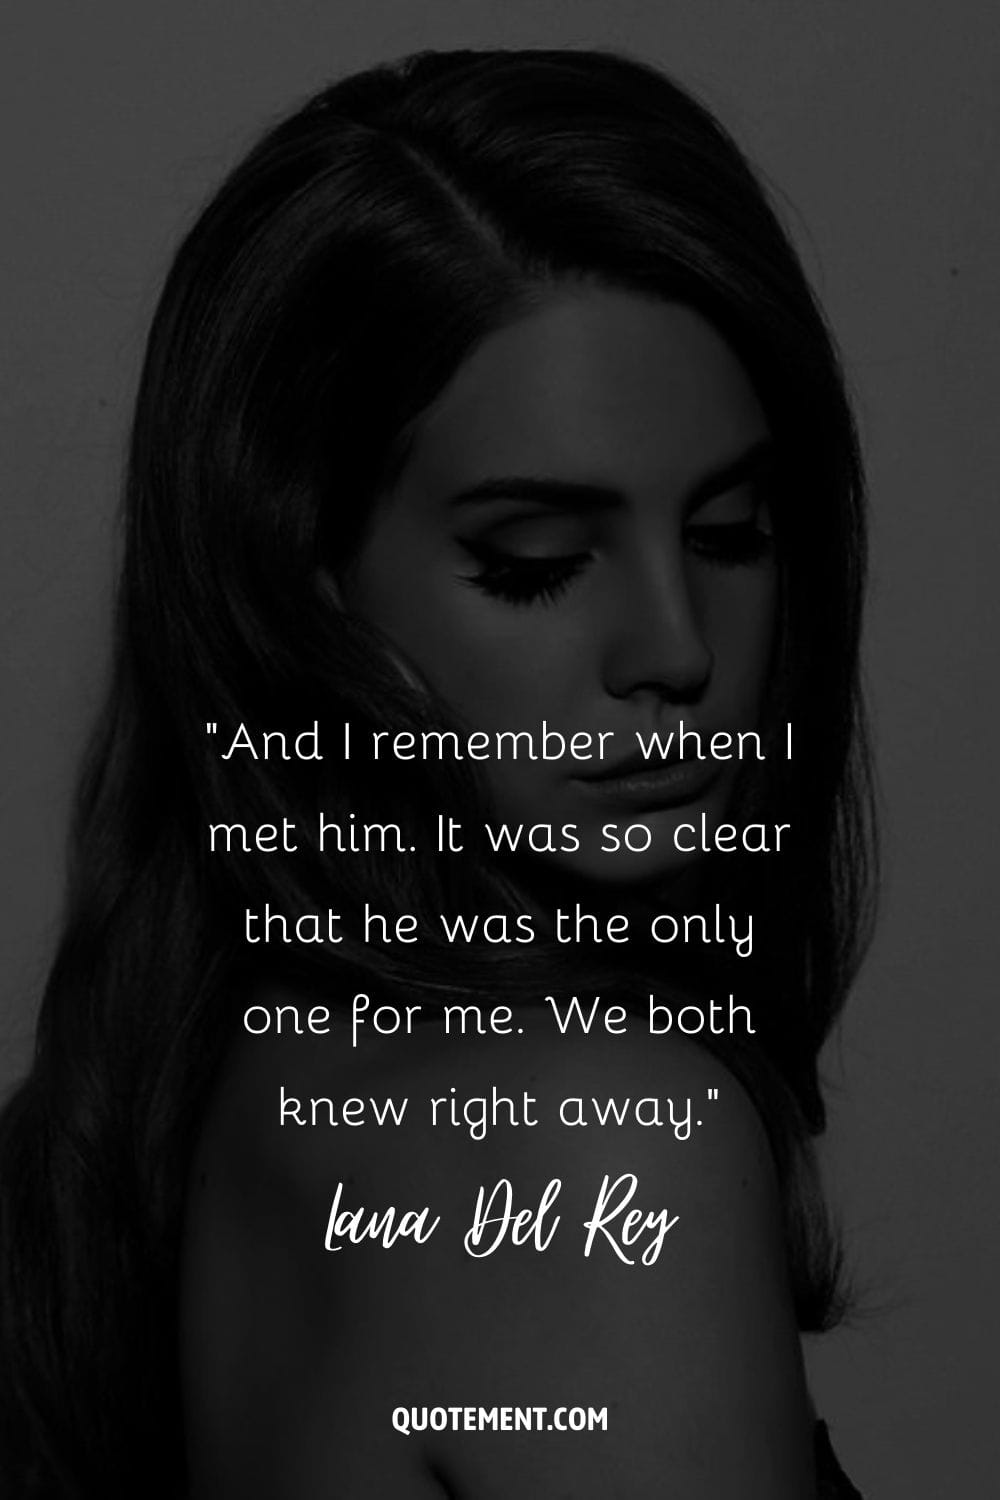 And I remember when I met him. It was so clear that he was the only one for me. We both knew right away.